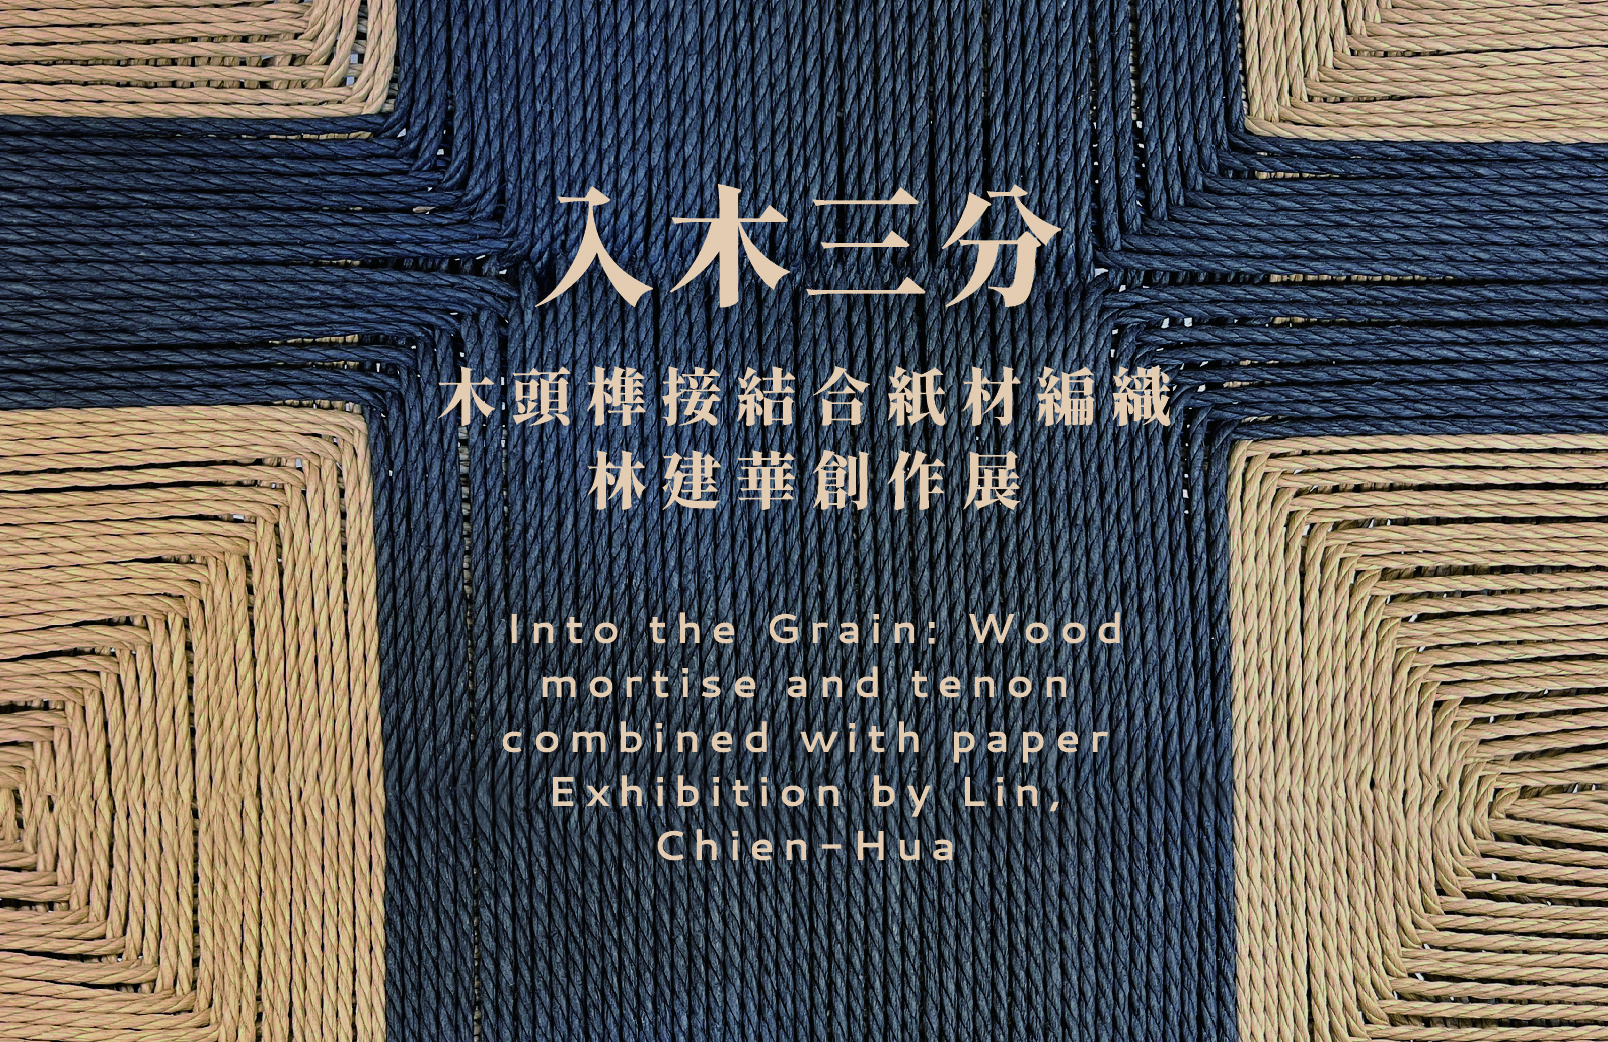 Featured image for “【入木三分】木頭榫接結合紙材編織林建華創作展 Into the Grain: Wood mortise and tenon combined with paper Exhibition by Lin, Chien-Hua”